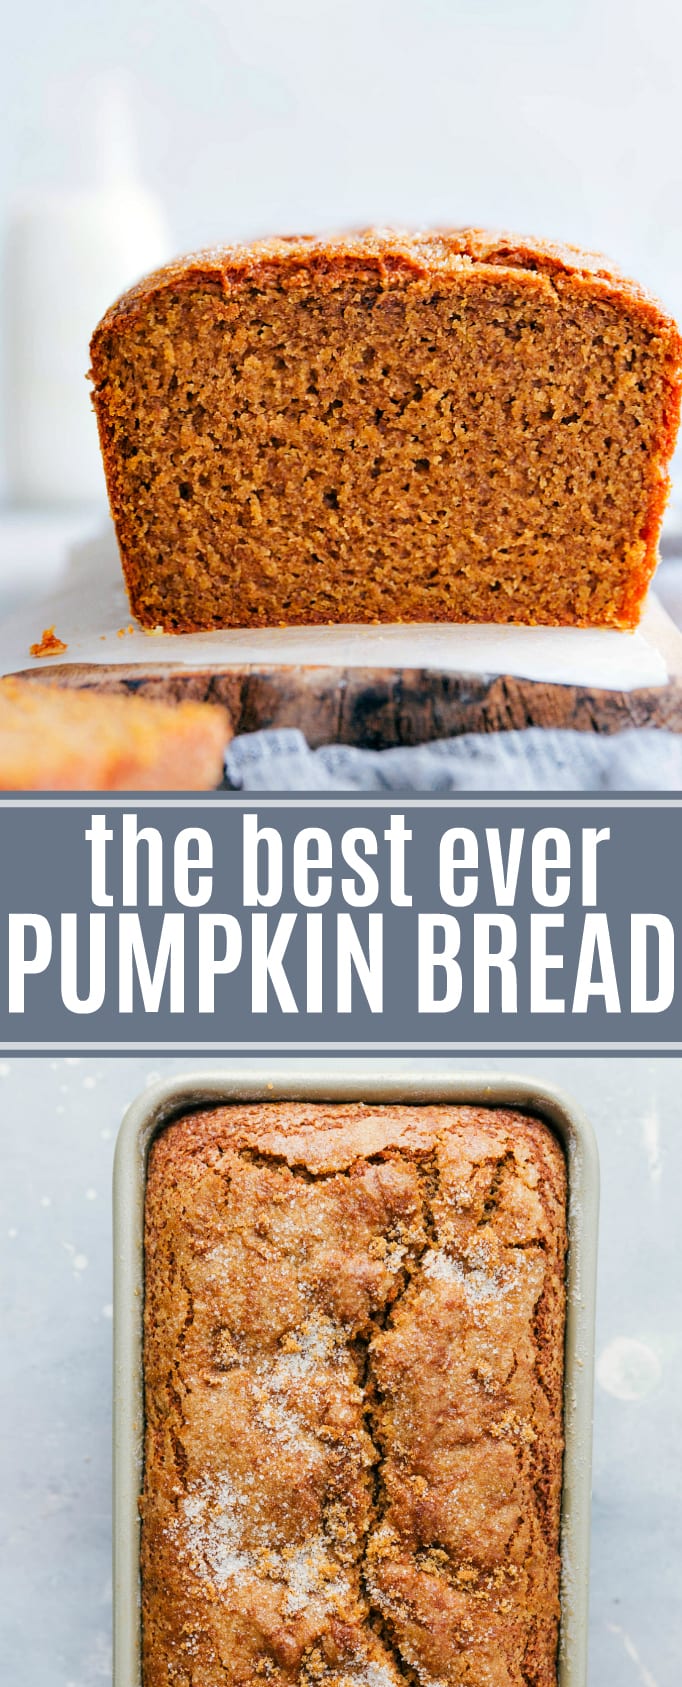 This is the best-ever, tested-to-perfection, made-from-scratch, moist pumpkin bread. Directions for miniature or full sized loaves of bread. The miniature loaves are great for holiday gift-giving! | chelseasmessyapron.com | #pumpkin #bread #best #ever #mini #miniature #chocolatechips #fall #baking #thanksgiving #easy #quick #recipe #kidfriendly